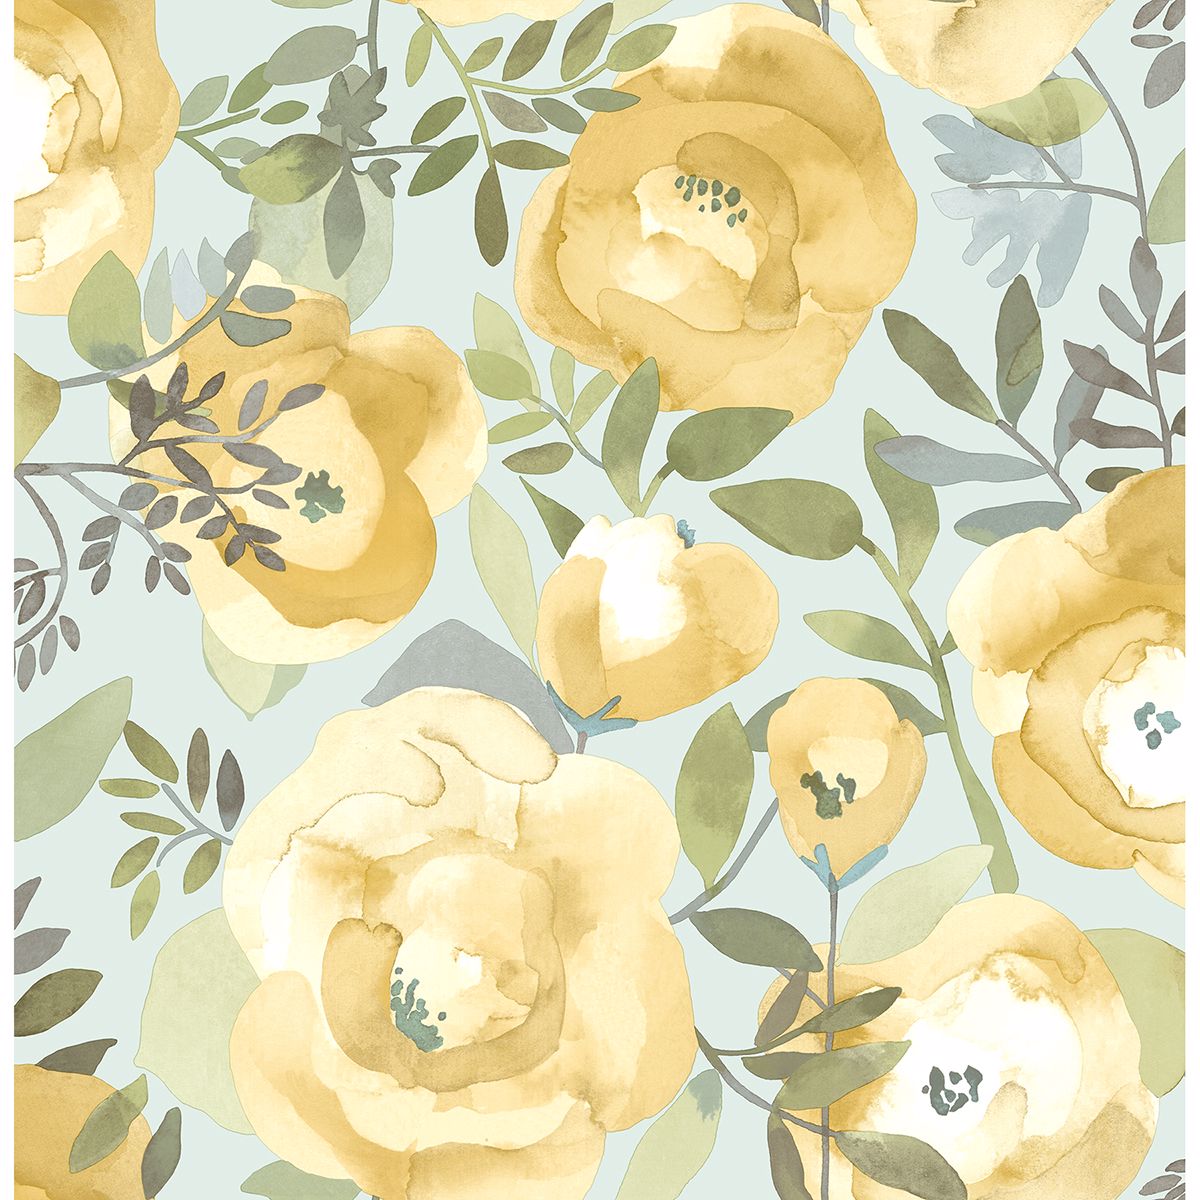 Picture of Orla Yellow Floral Wallpaper